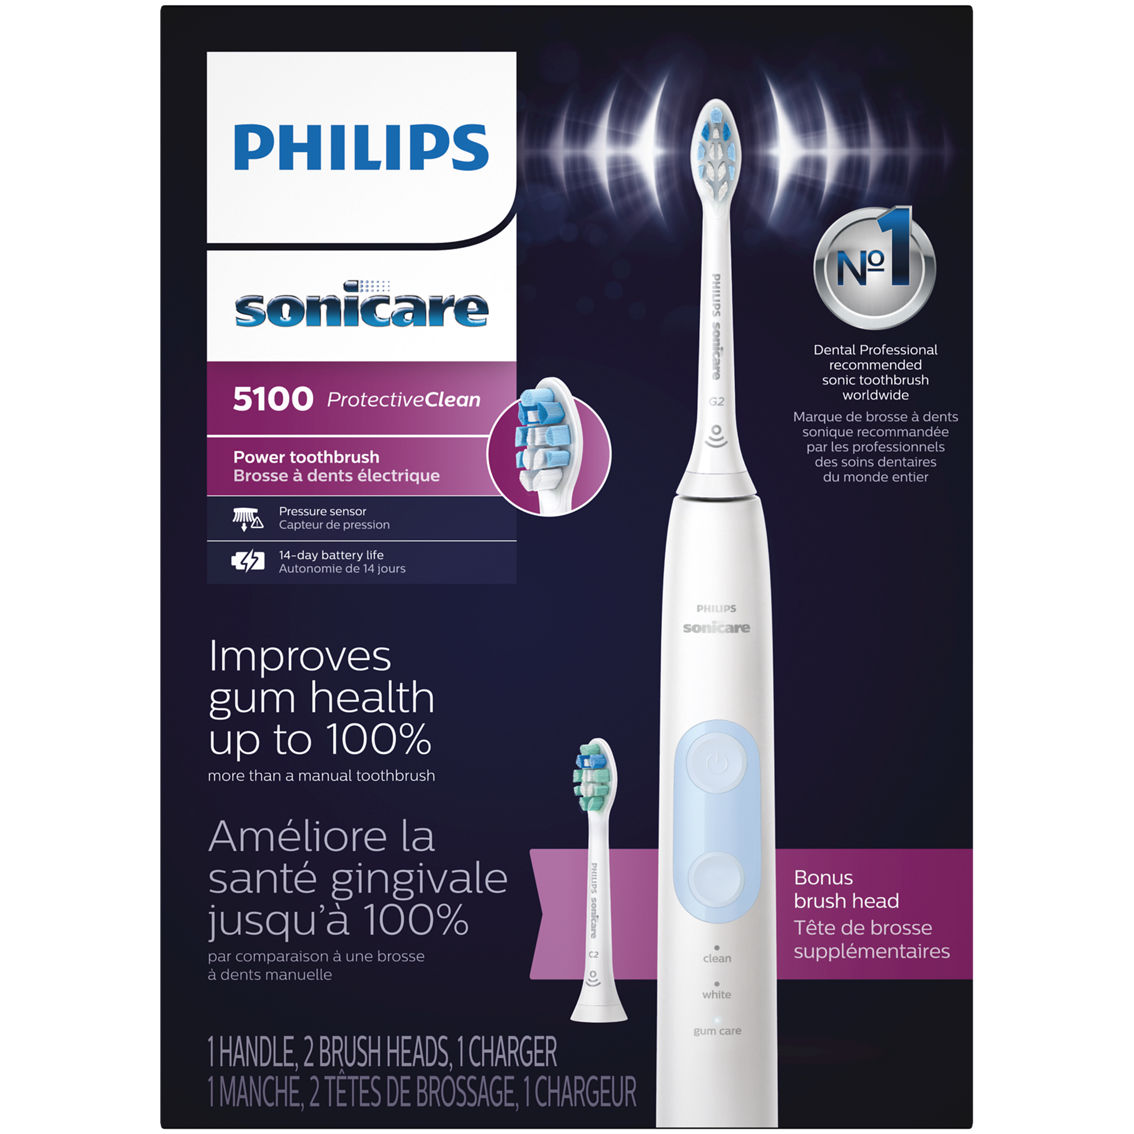 Philips Sonicare Protective Clean 5100 Electric Toothbrush with Bonus Brush Heads